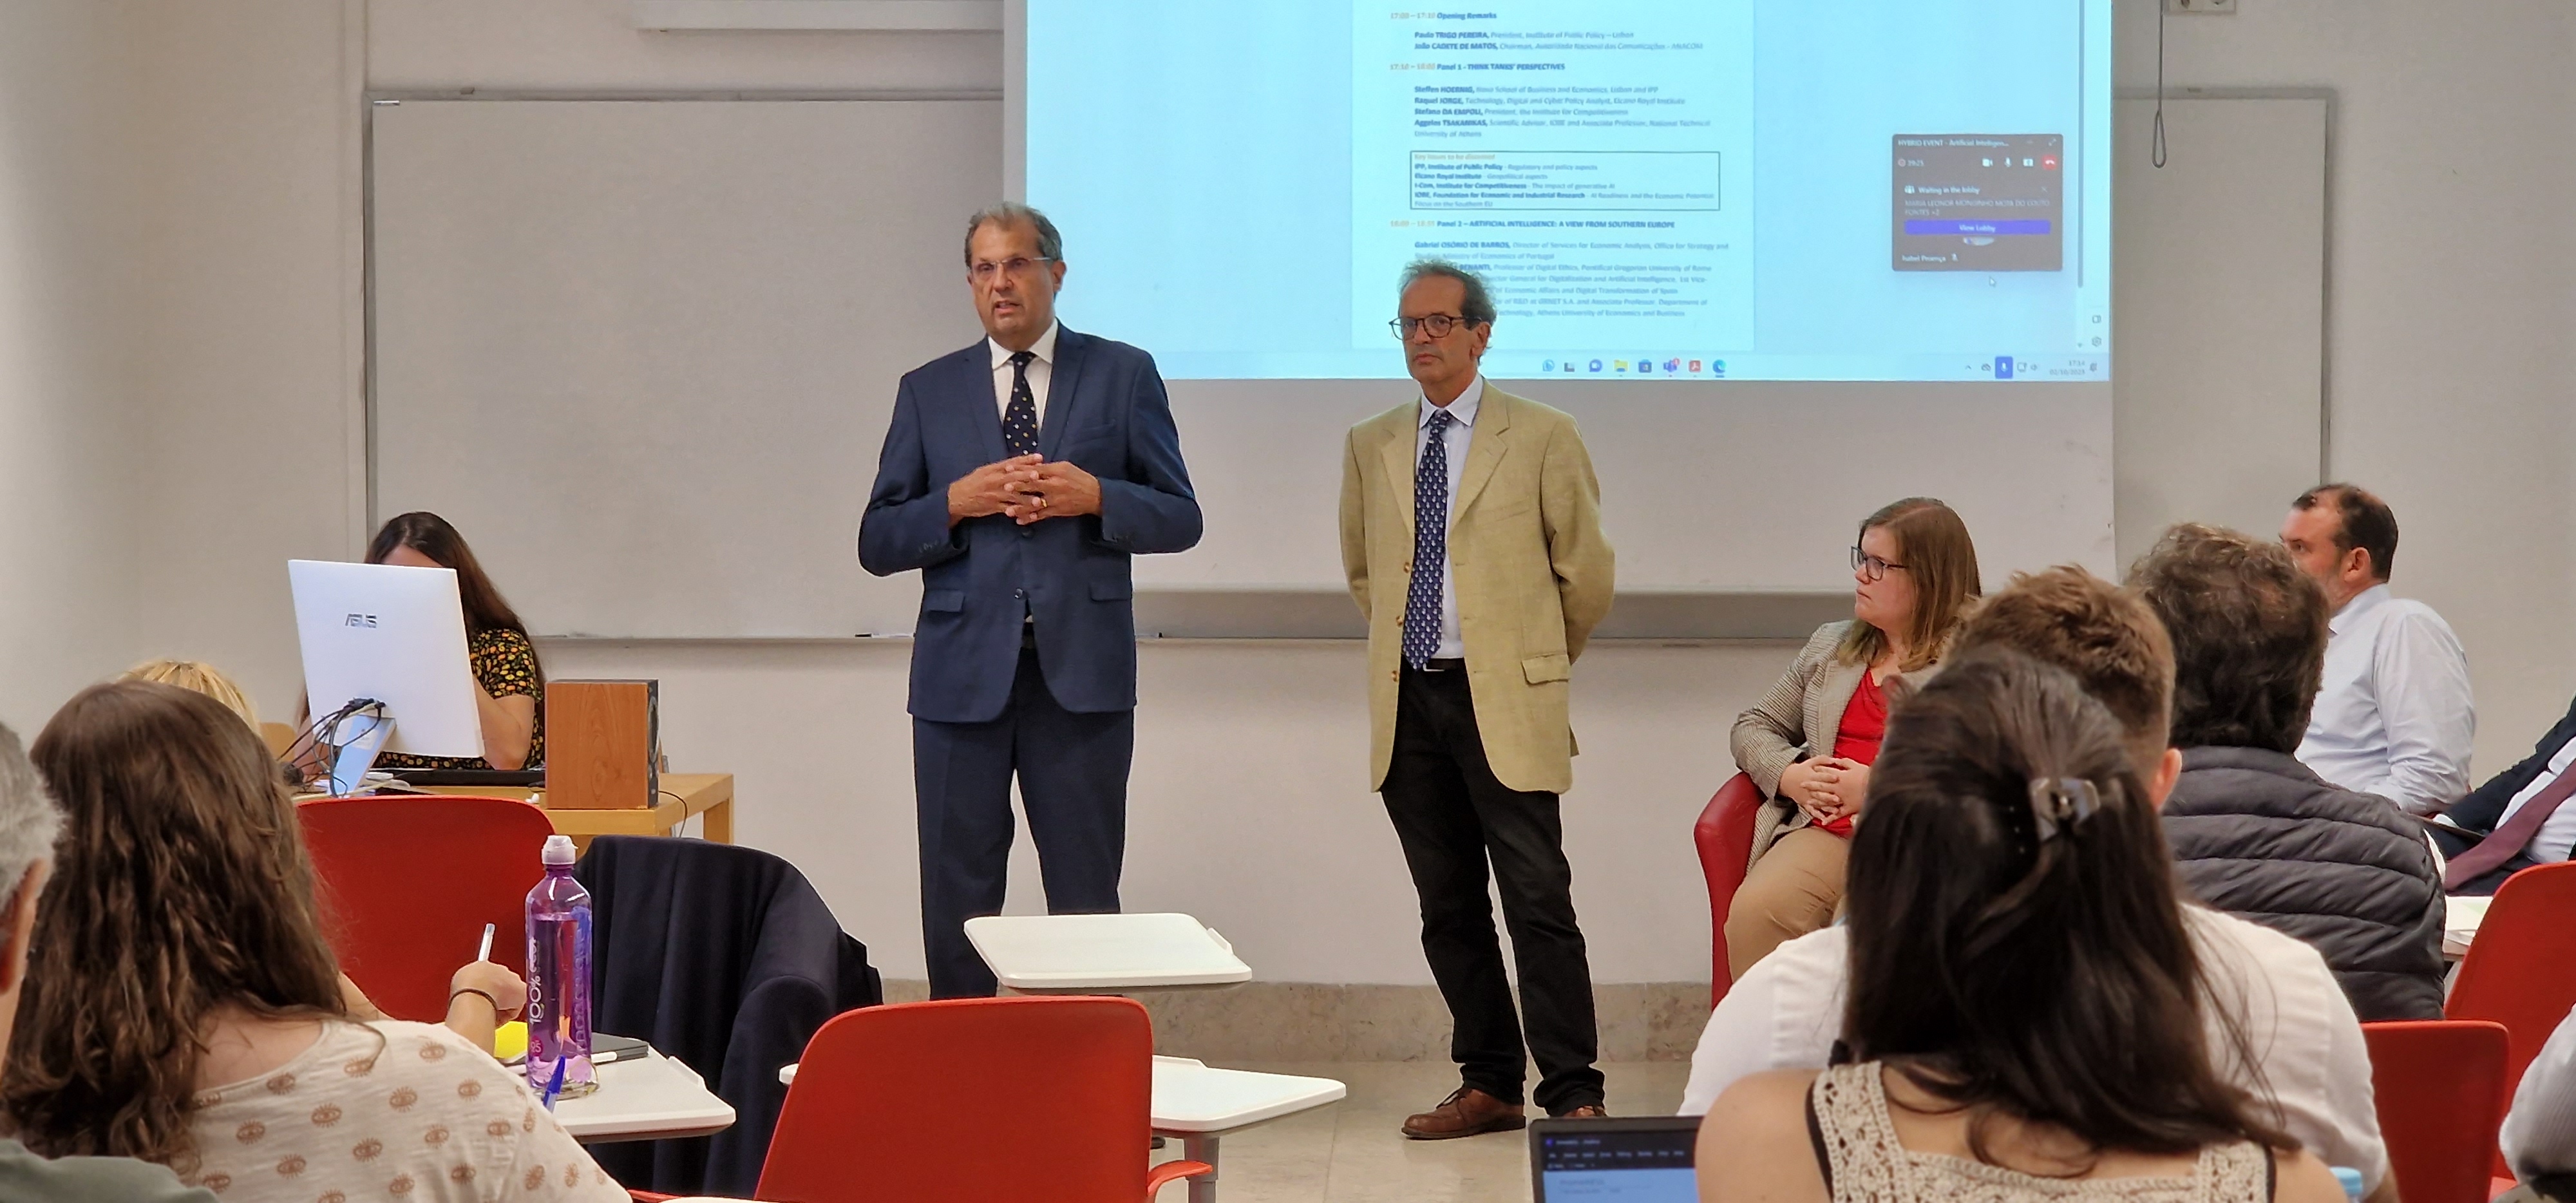 Moment from the opening session of the seminar with João Cadete de Matos, Chairman of ANACOM (left) and Paulo Trigo Pereira, Chairman of the Institute for Public Policy (right)